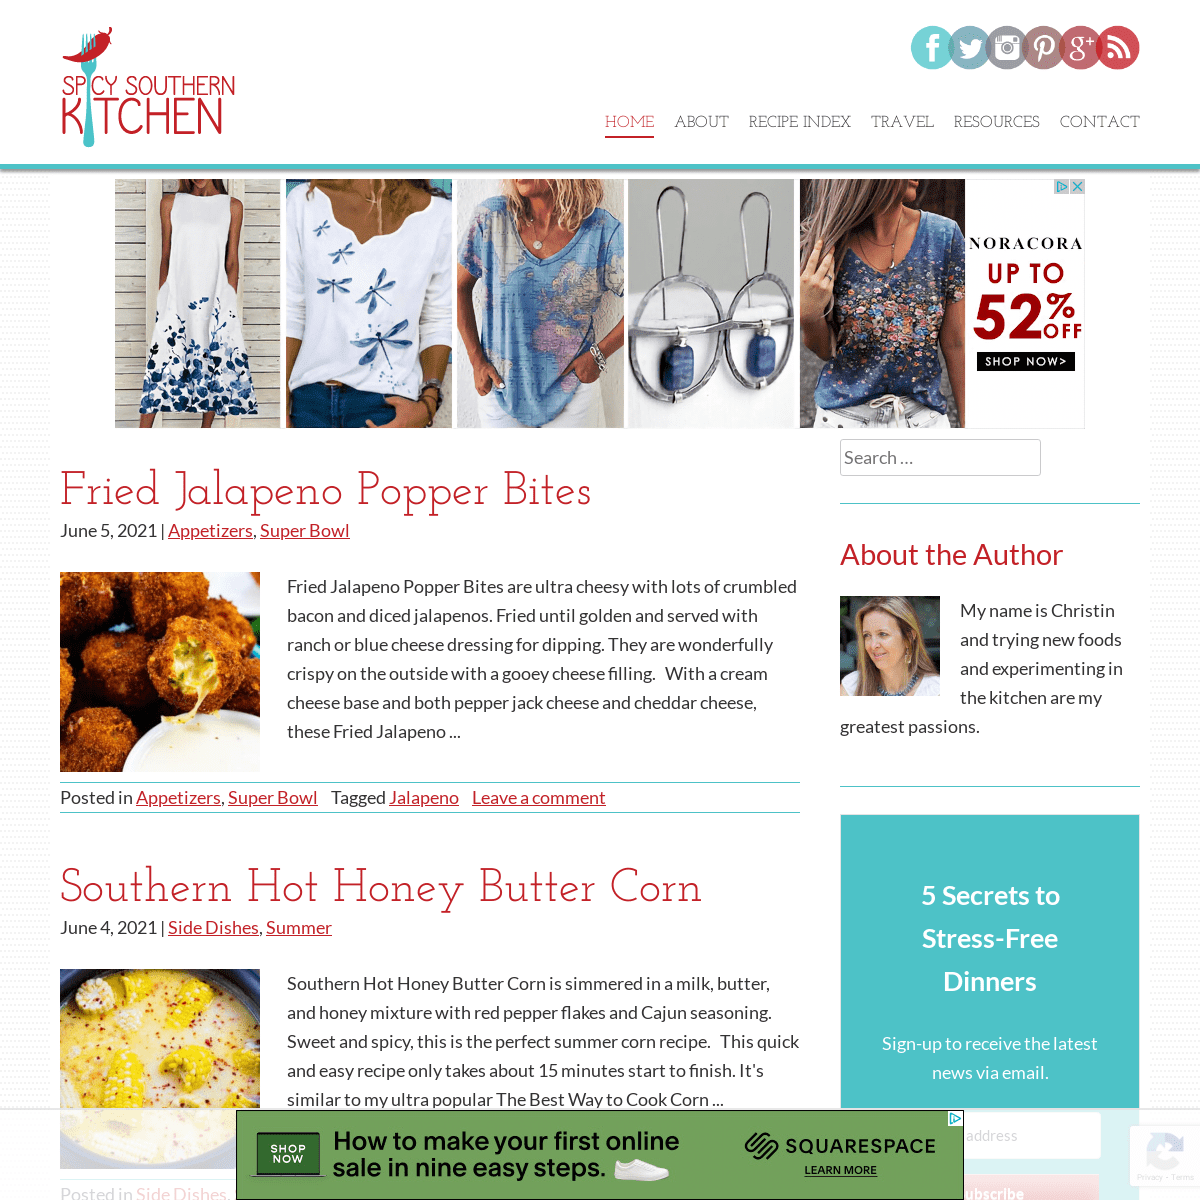 A complete backup of https://spicysouthernkitchen.com